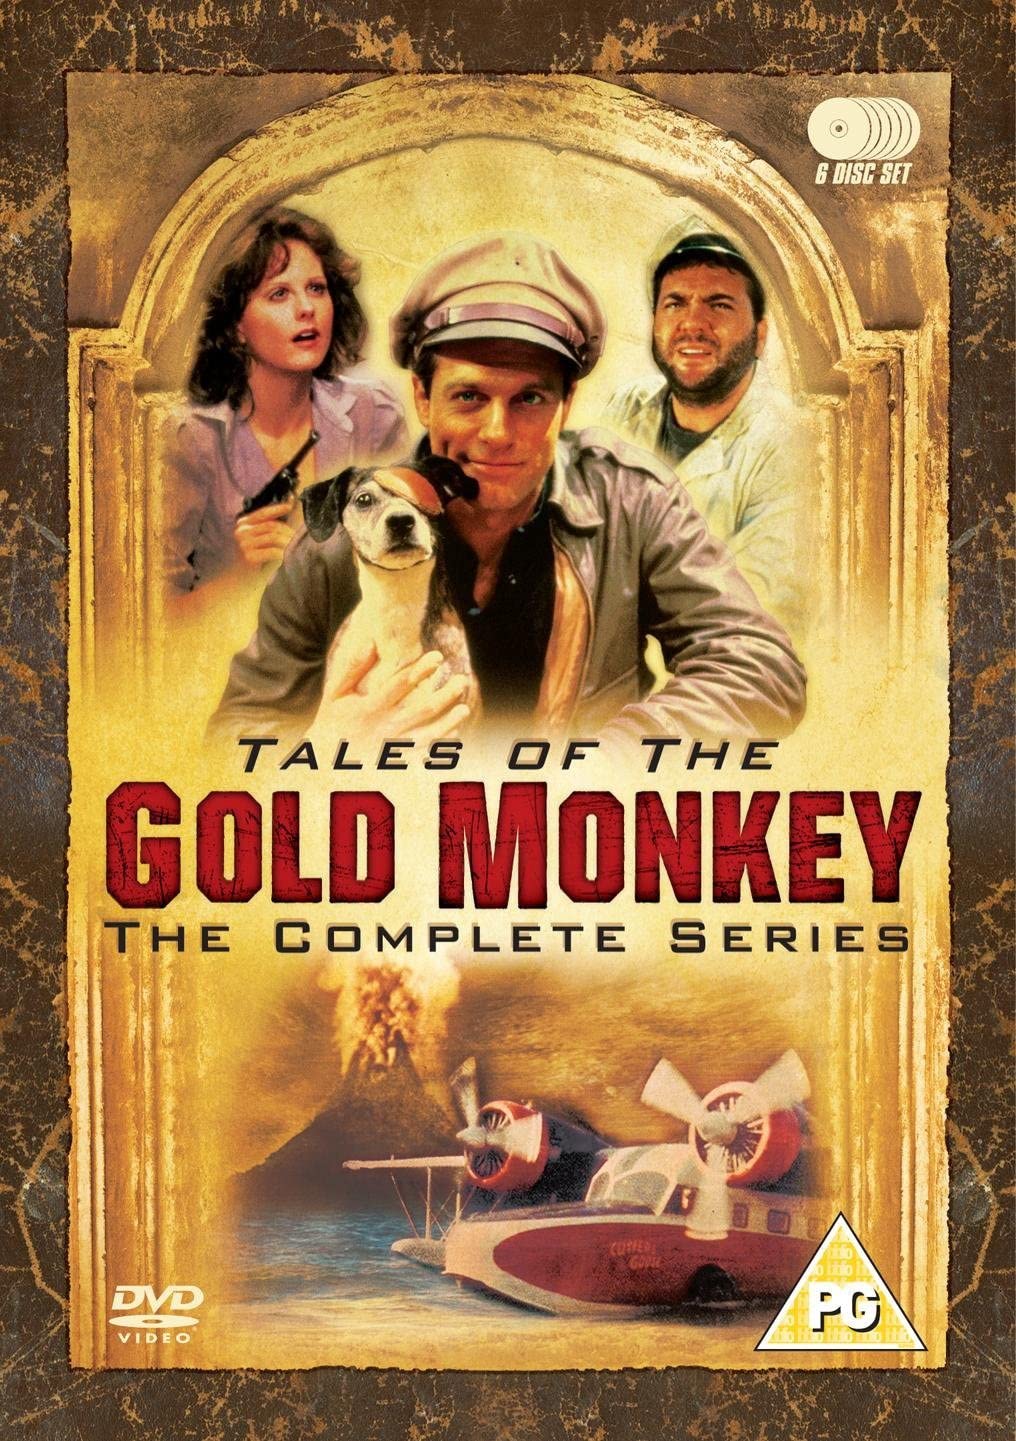 Tales Of The Gold Monkey - The Complete Series [1982] - [DVD]